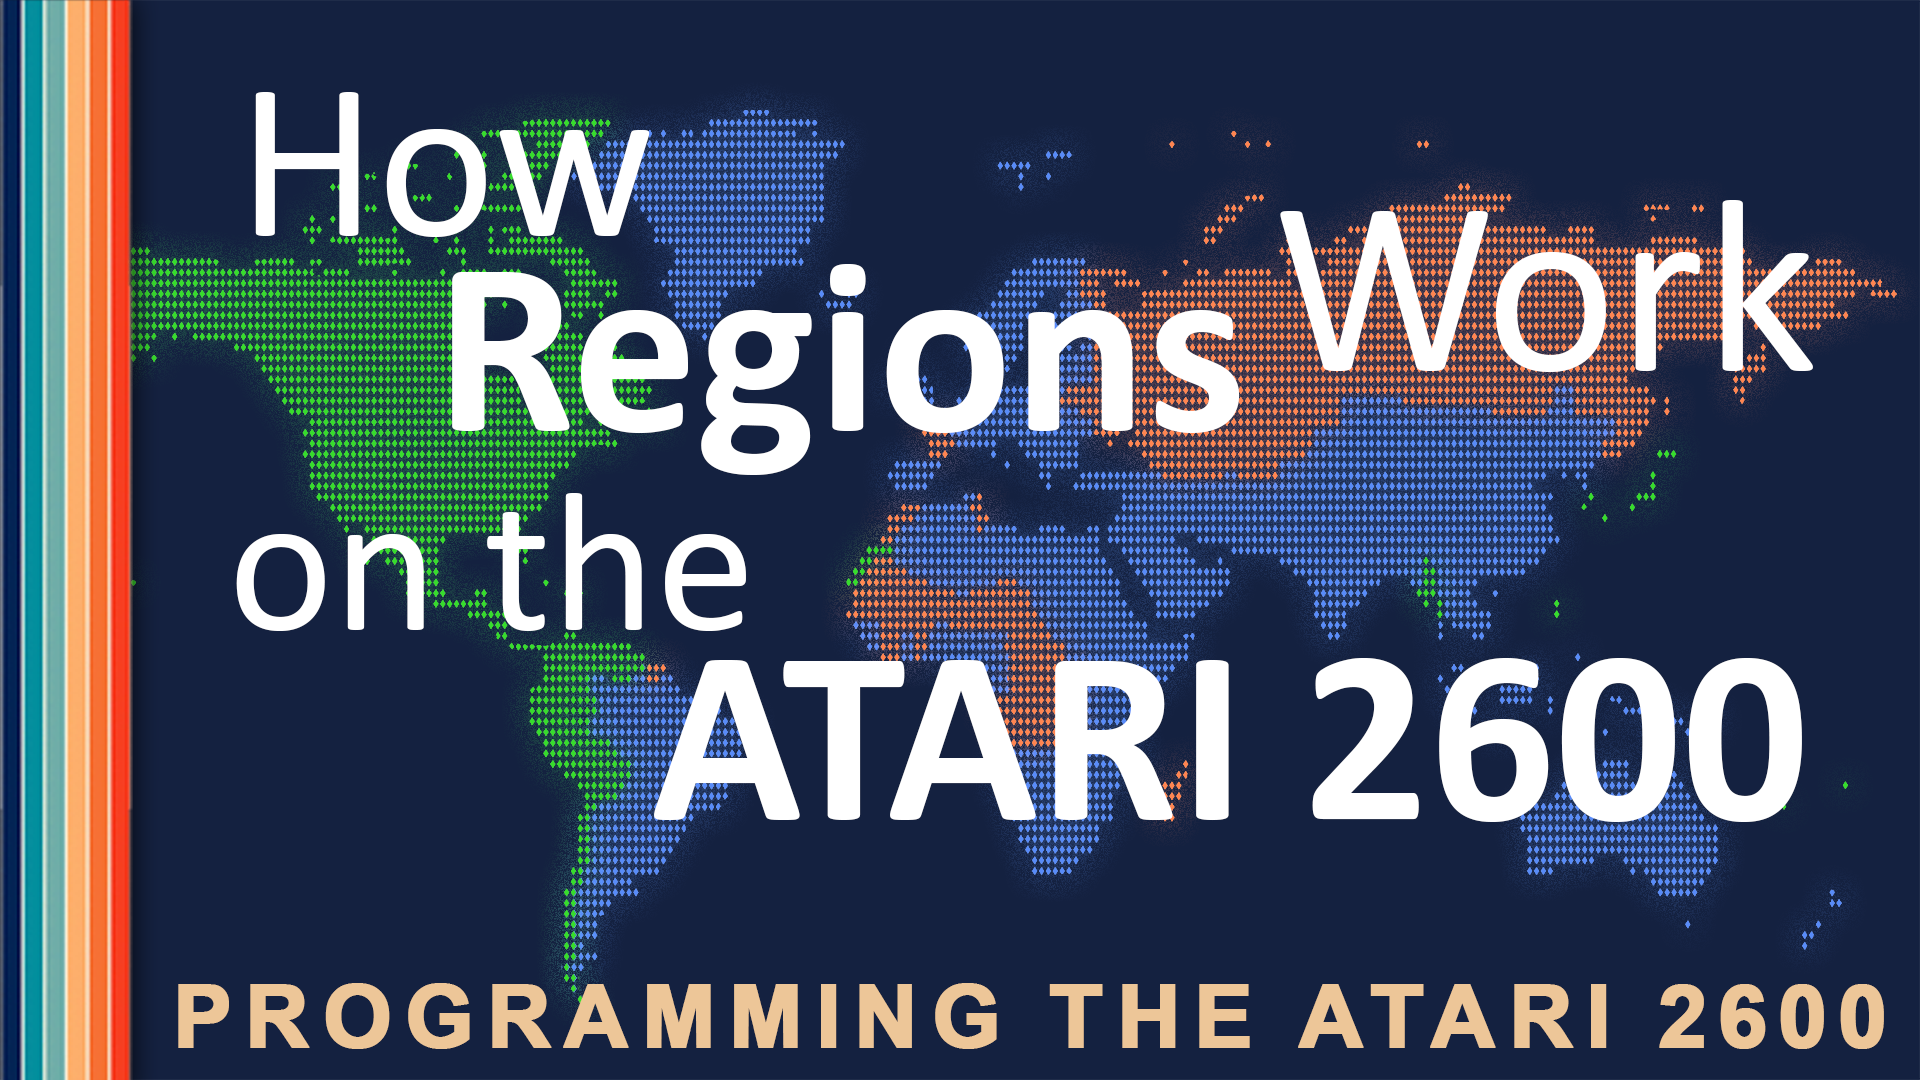 Learn how the to program your game for differnt world regions for the ATARI 2600 game system